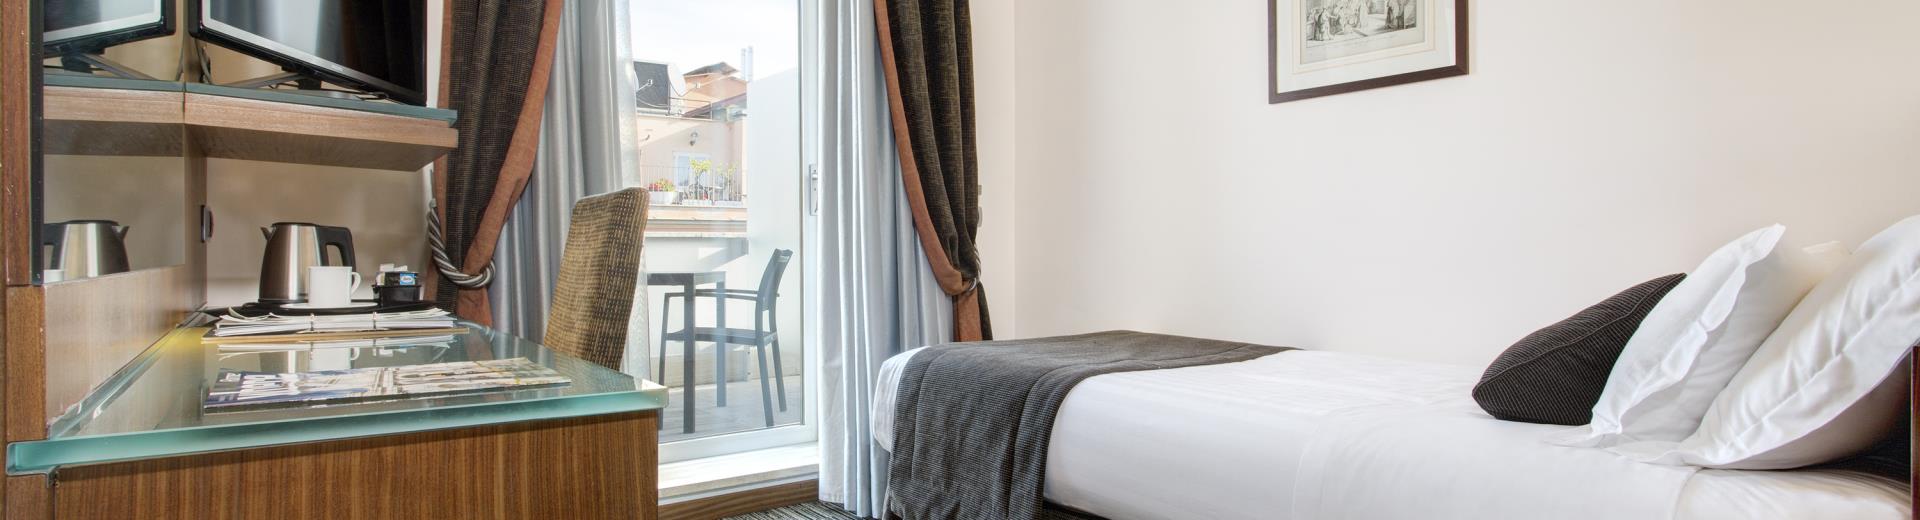 Standard rooms-Best Western Hotel Universo Rome 4 stars